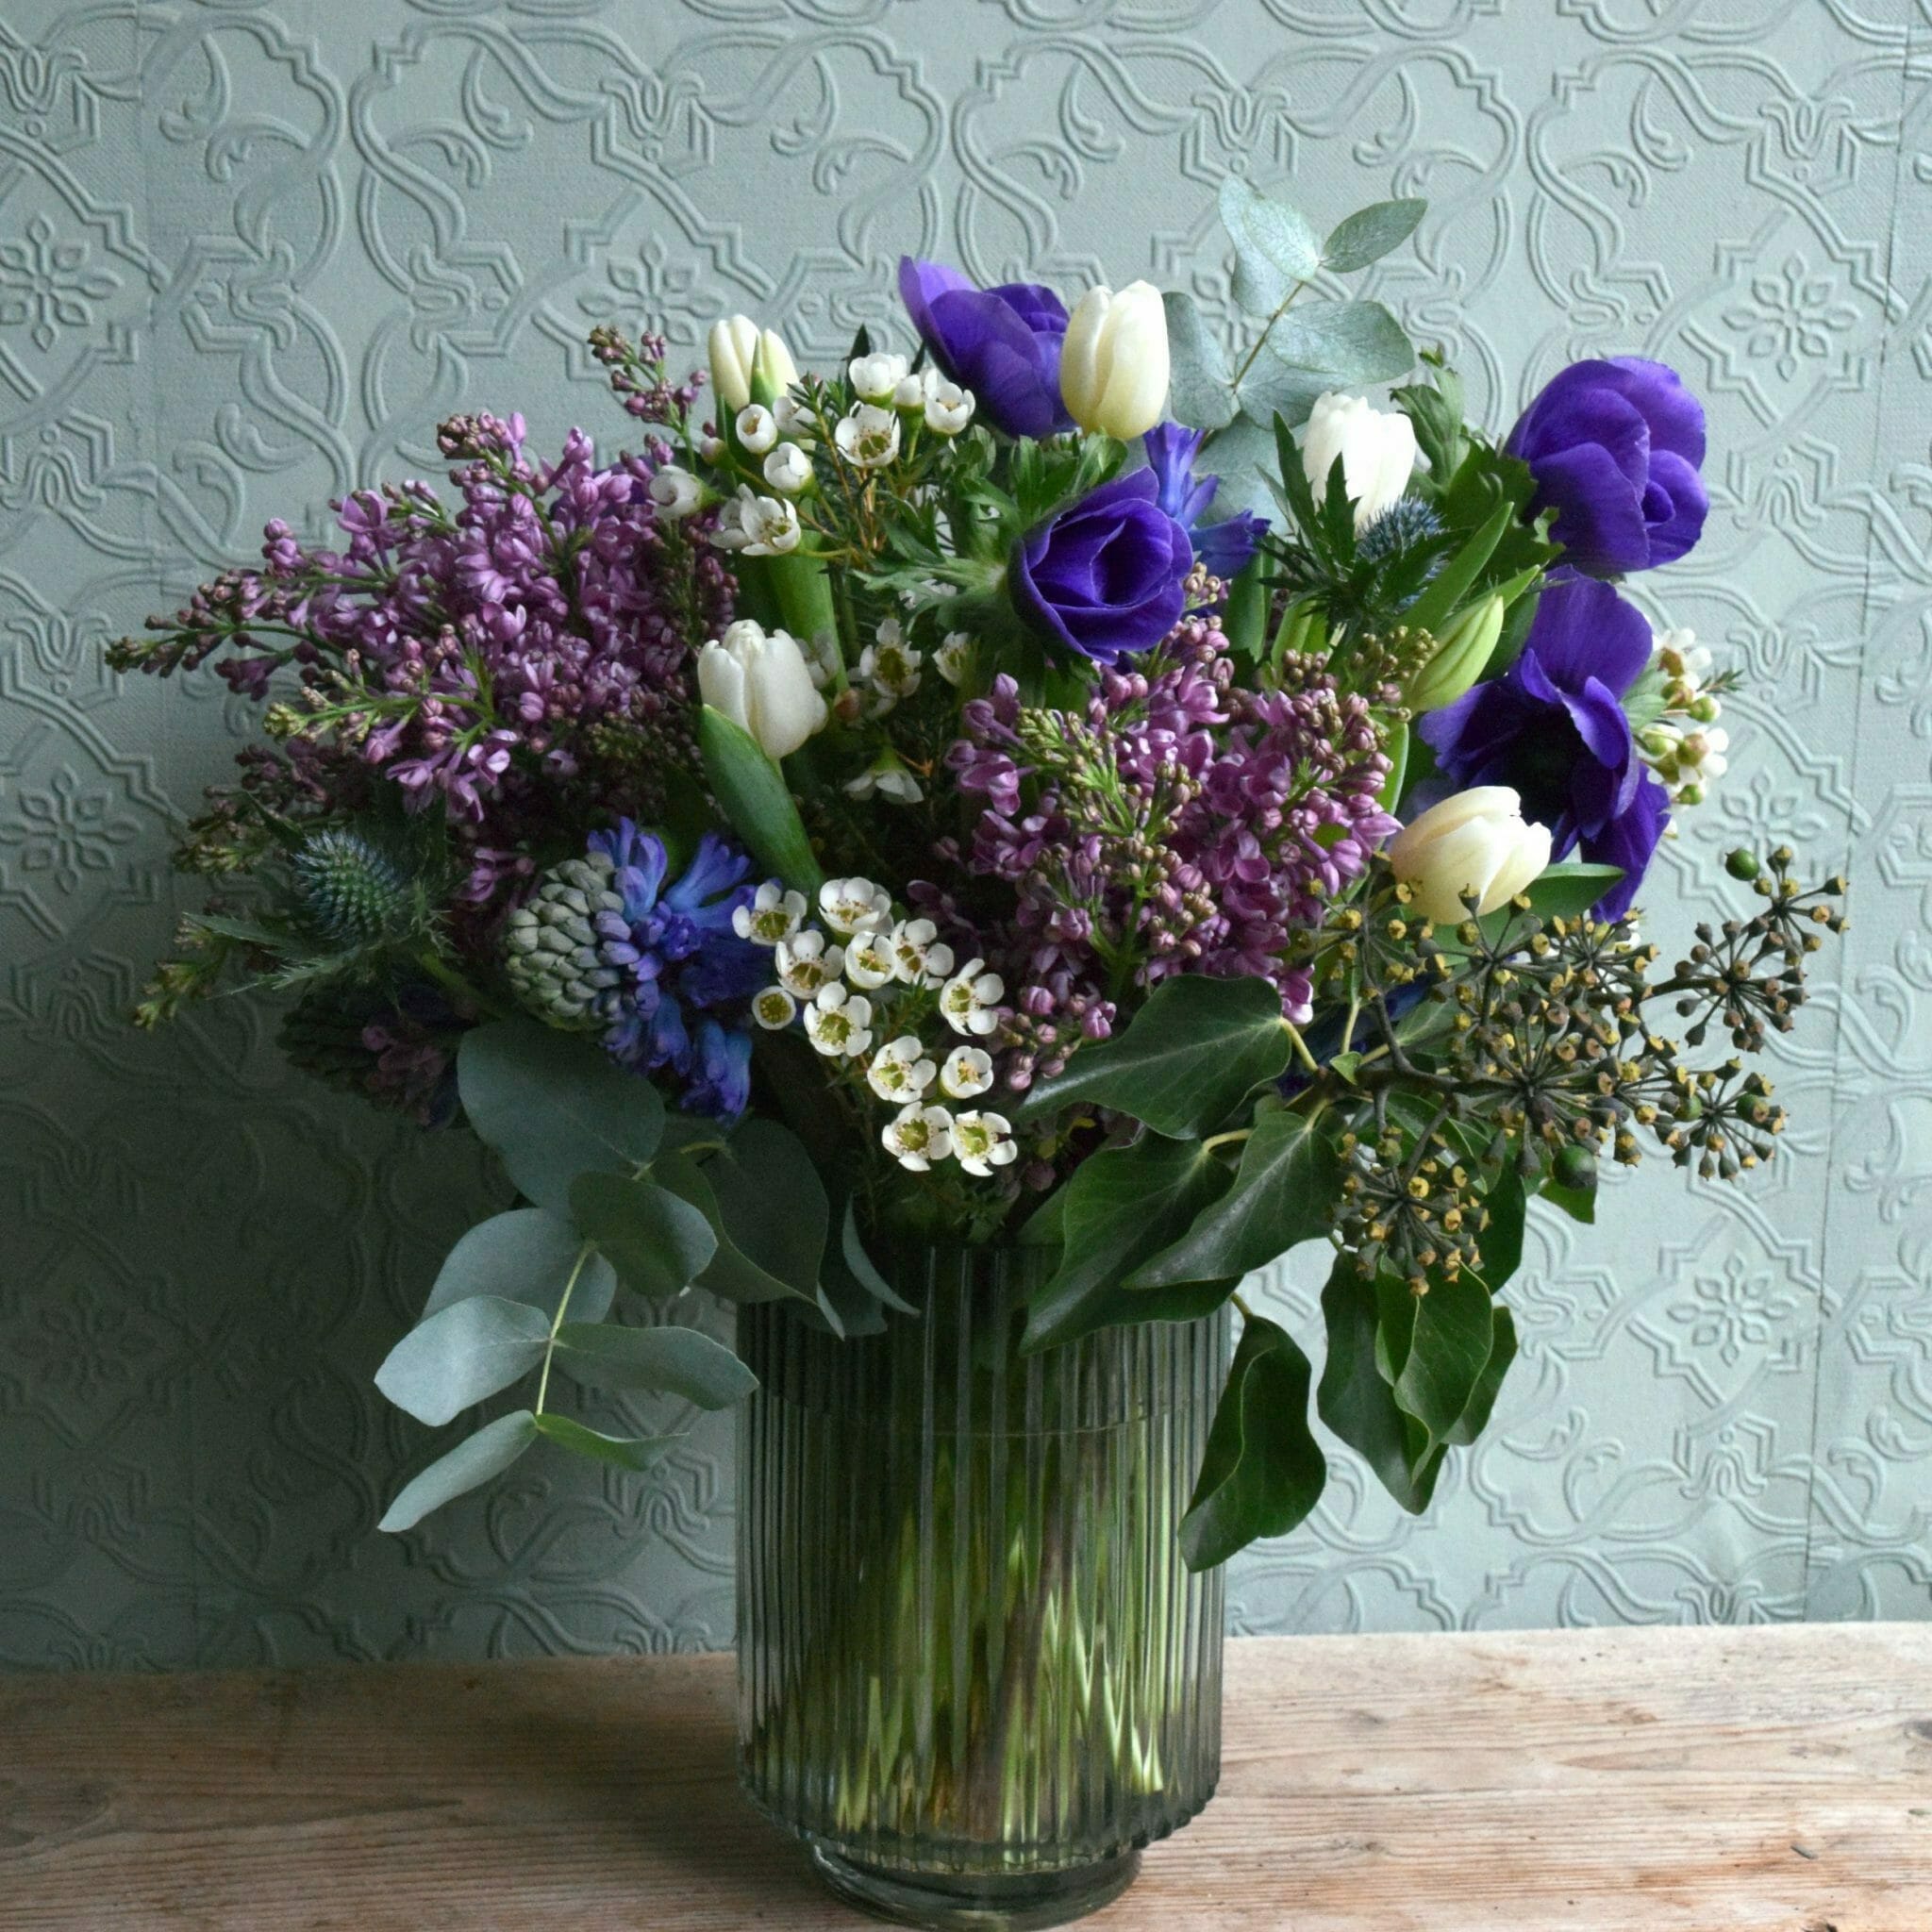 Photo showing a sample of a seasonal spring vase arrangement in blues, lilacs or white available to order from Kensington flowers London